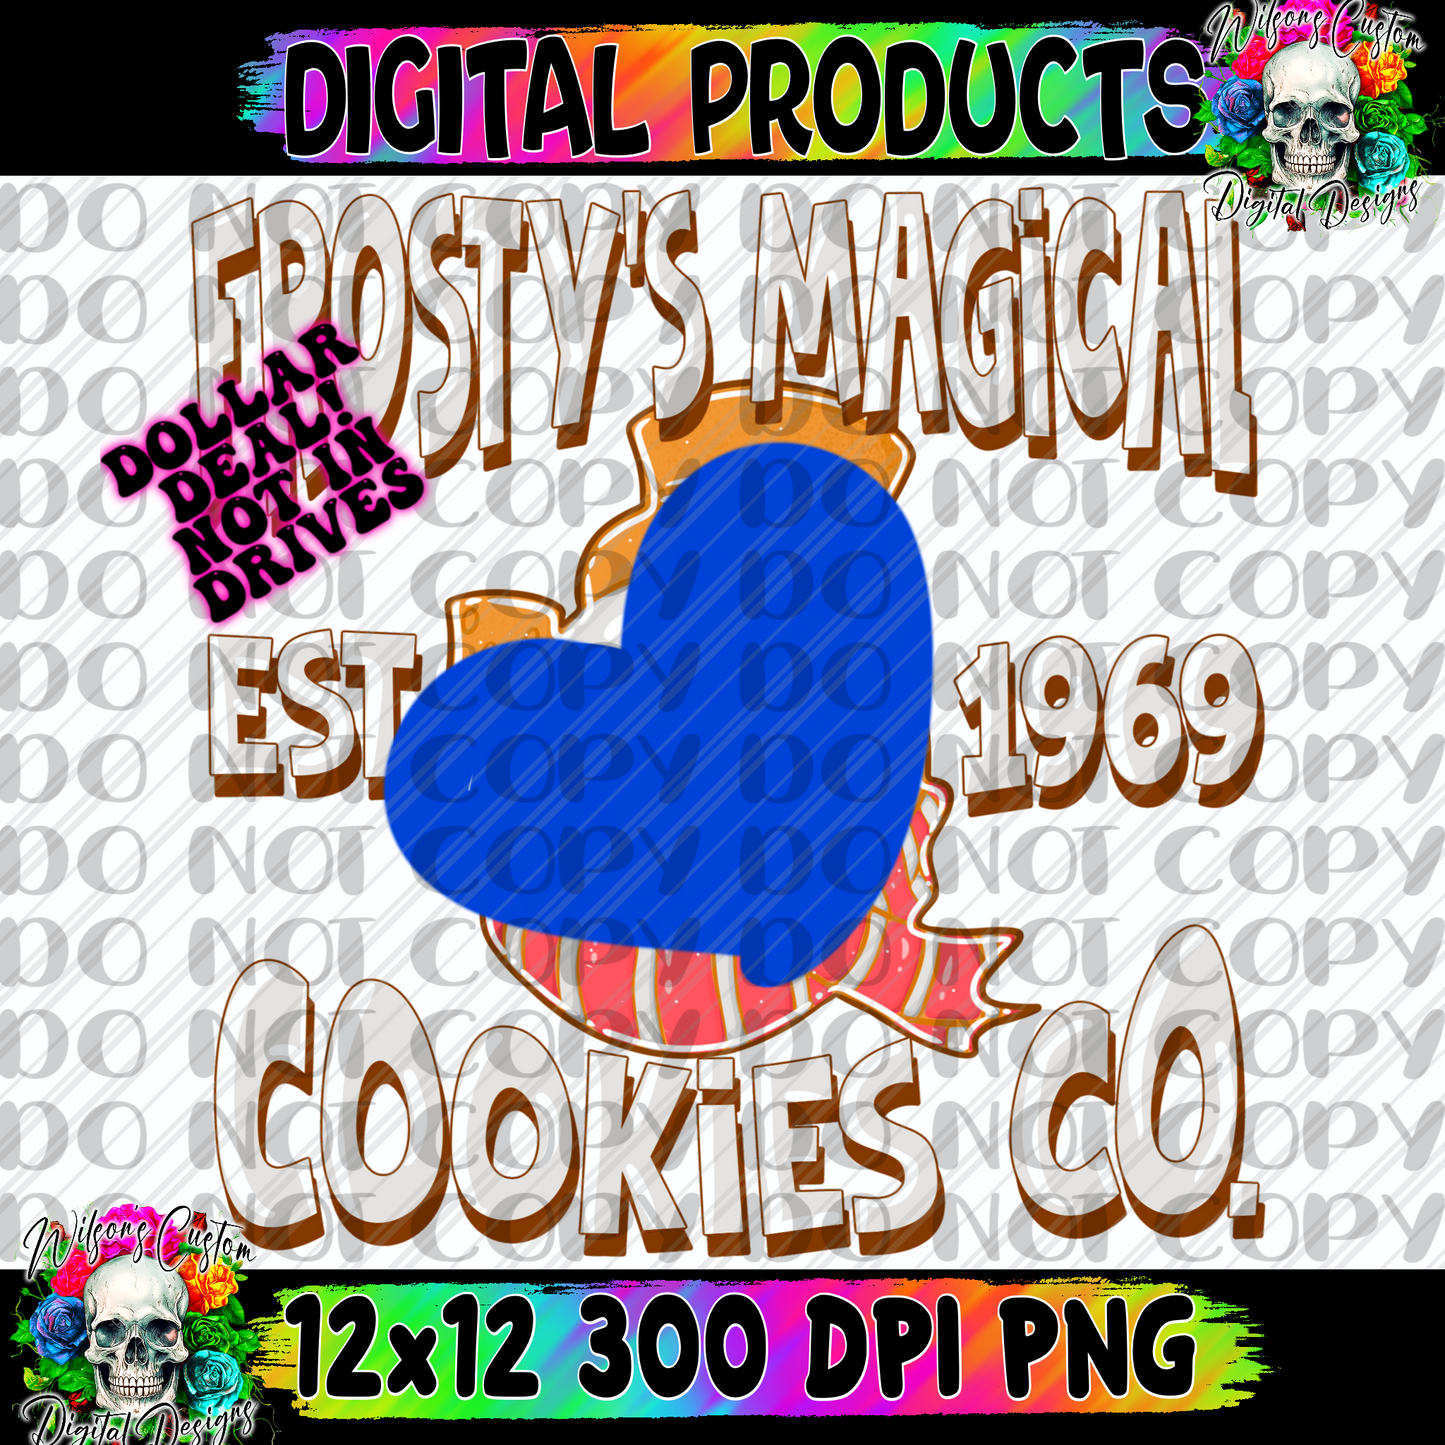 Frost cookies co